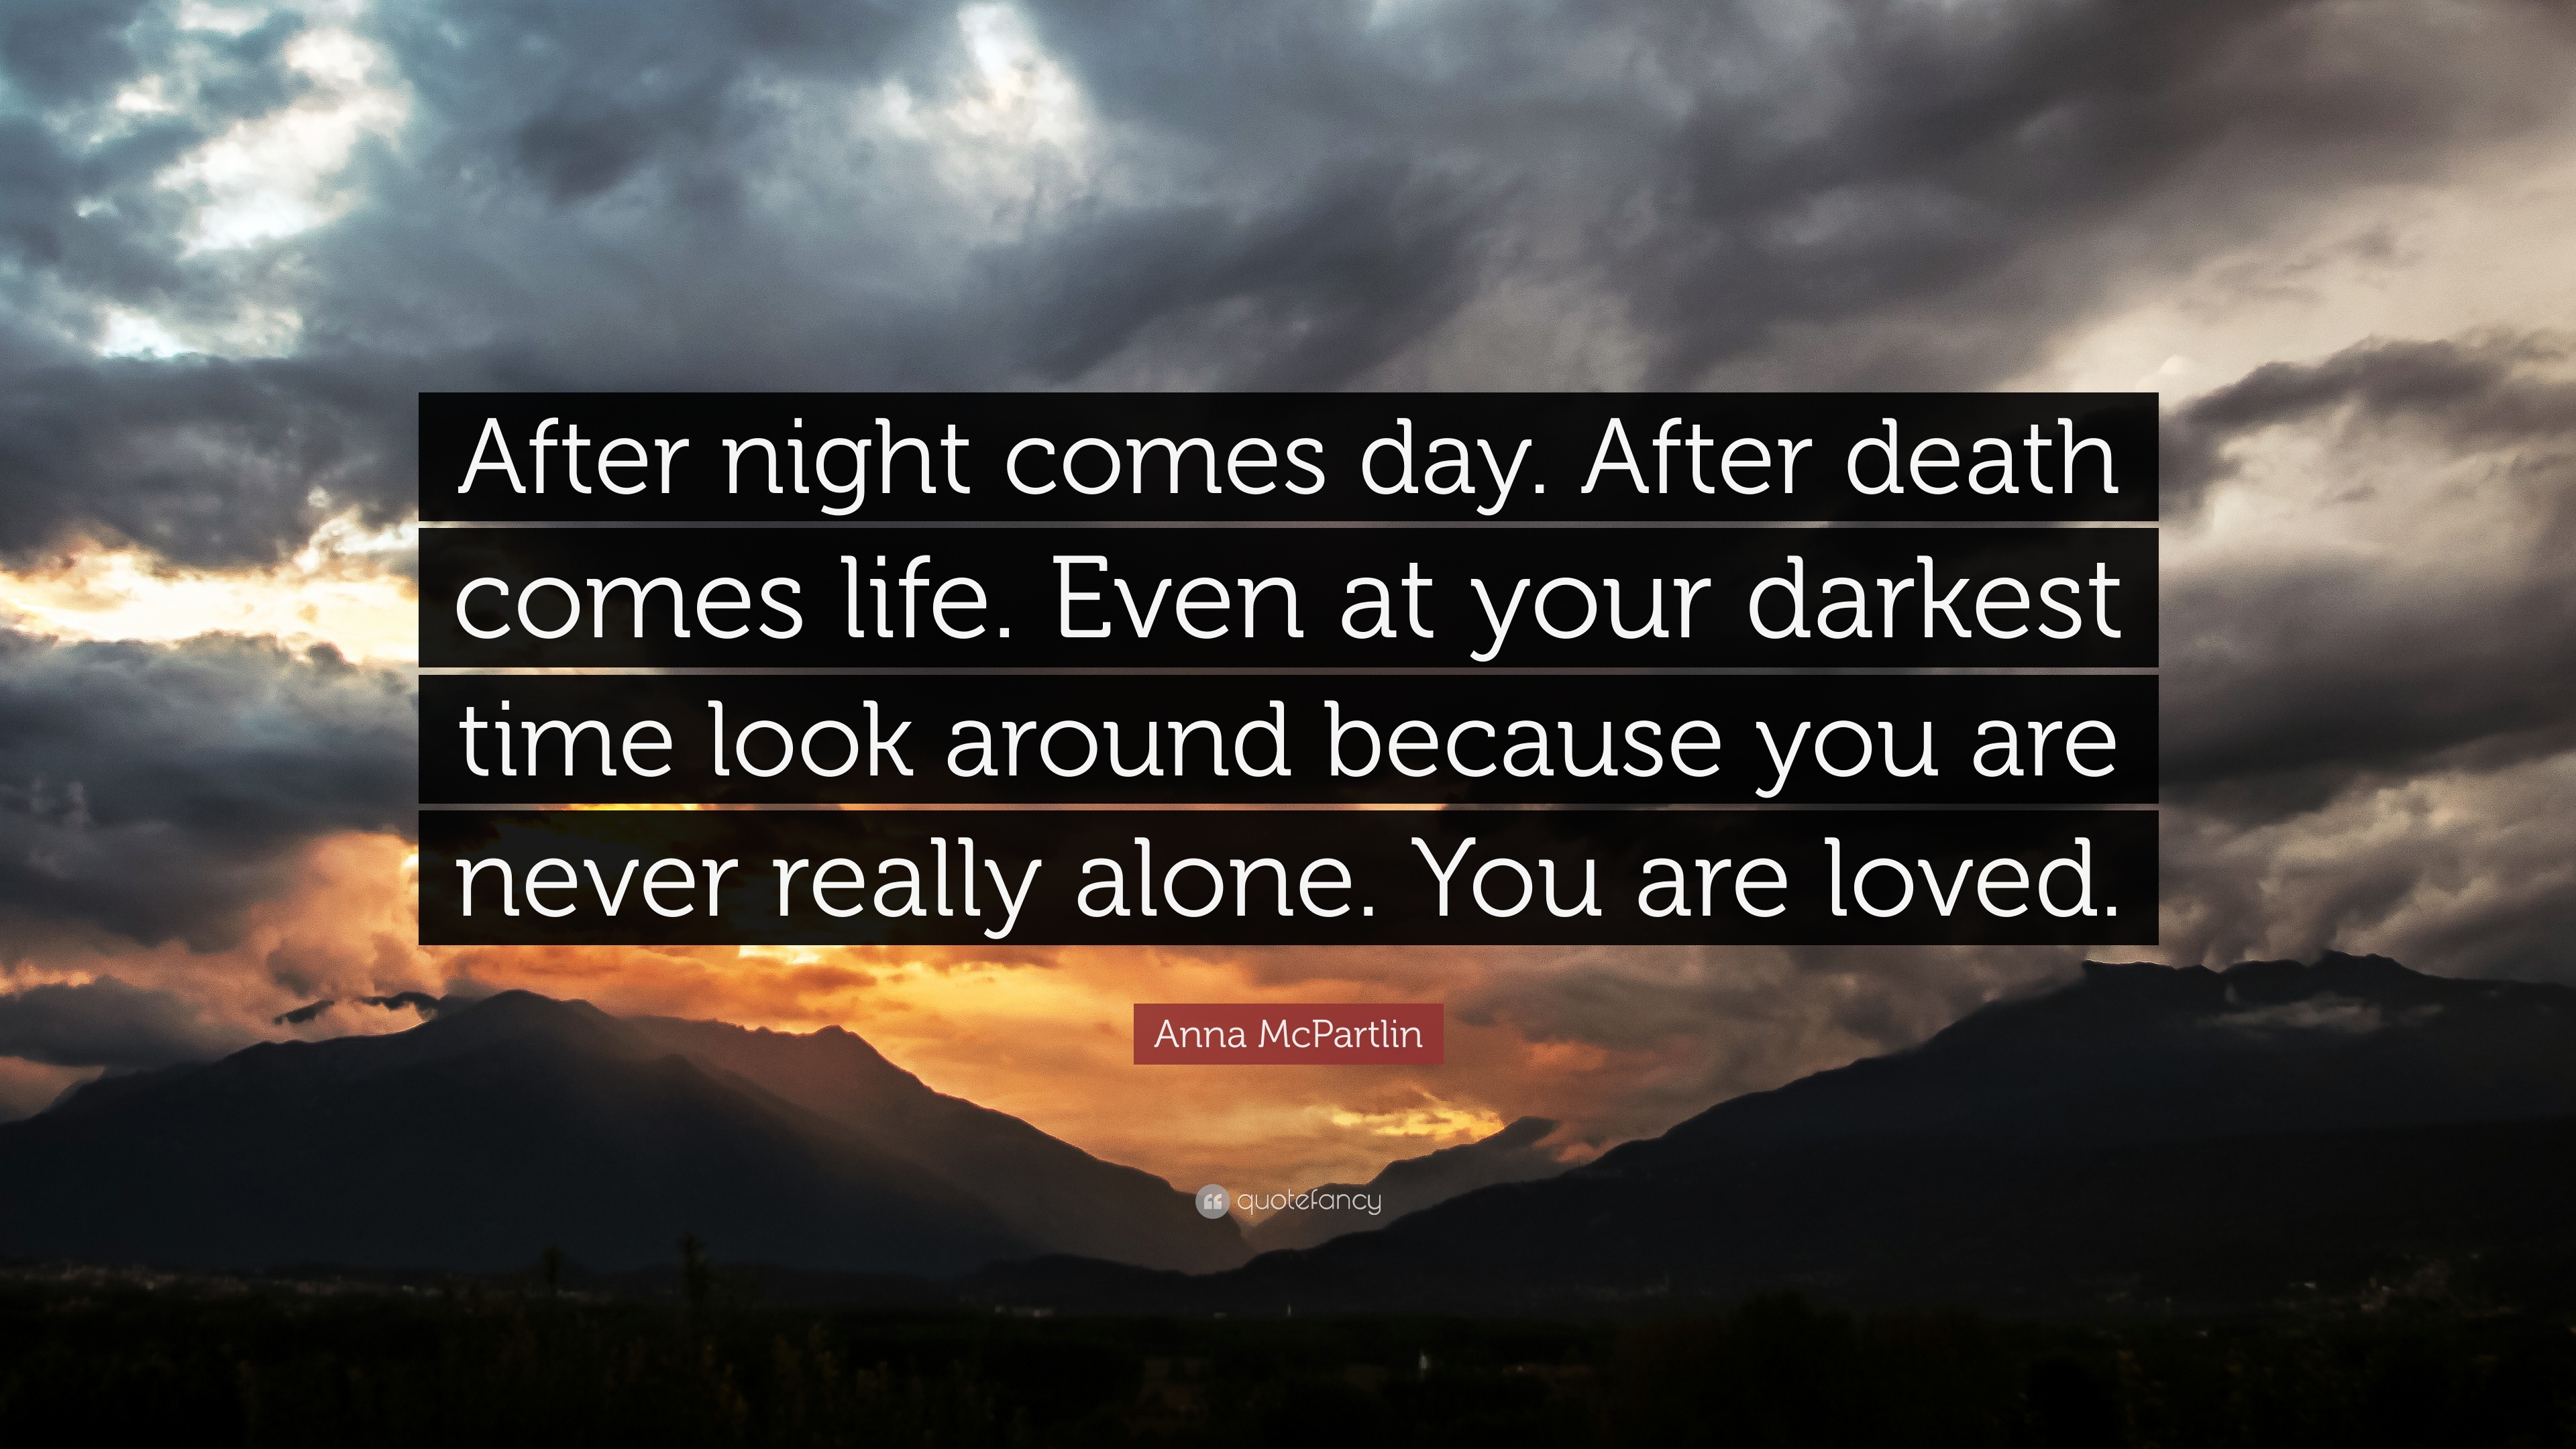 Anna McPartlin Quote “After night es day After es life Even